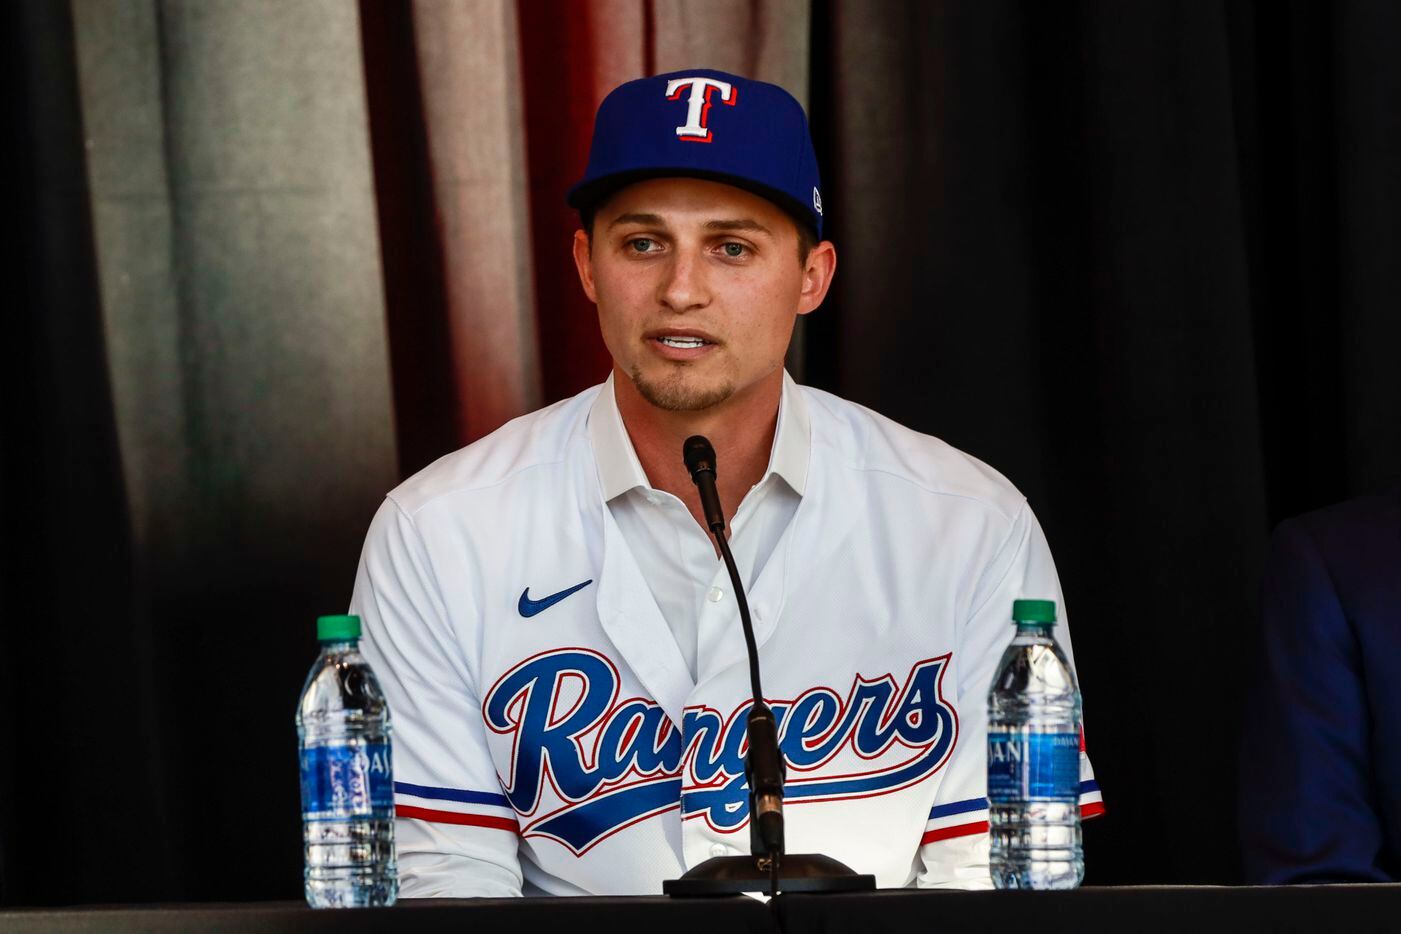 Corey Seager speaks at a news conference at Globe Life Park in Arlington on Wednesday, Dec. 1, 2021. Former Los Angeles Dodgers, Corey Seager, signed a ten year contract with the Texas Rangers for 325 million dollars. (Rebecca Slezak/The Dallas Morning News)